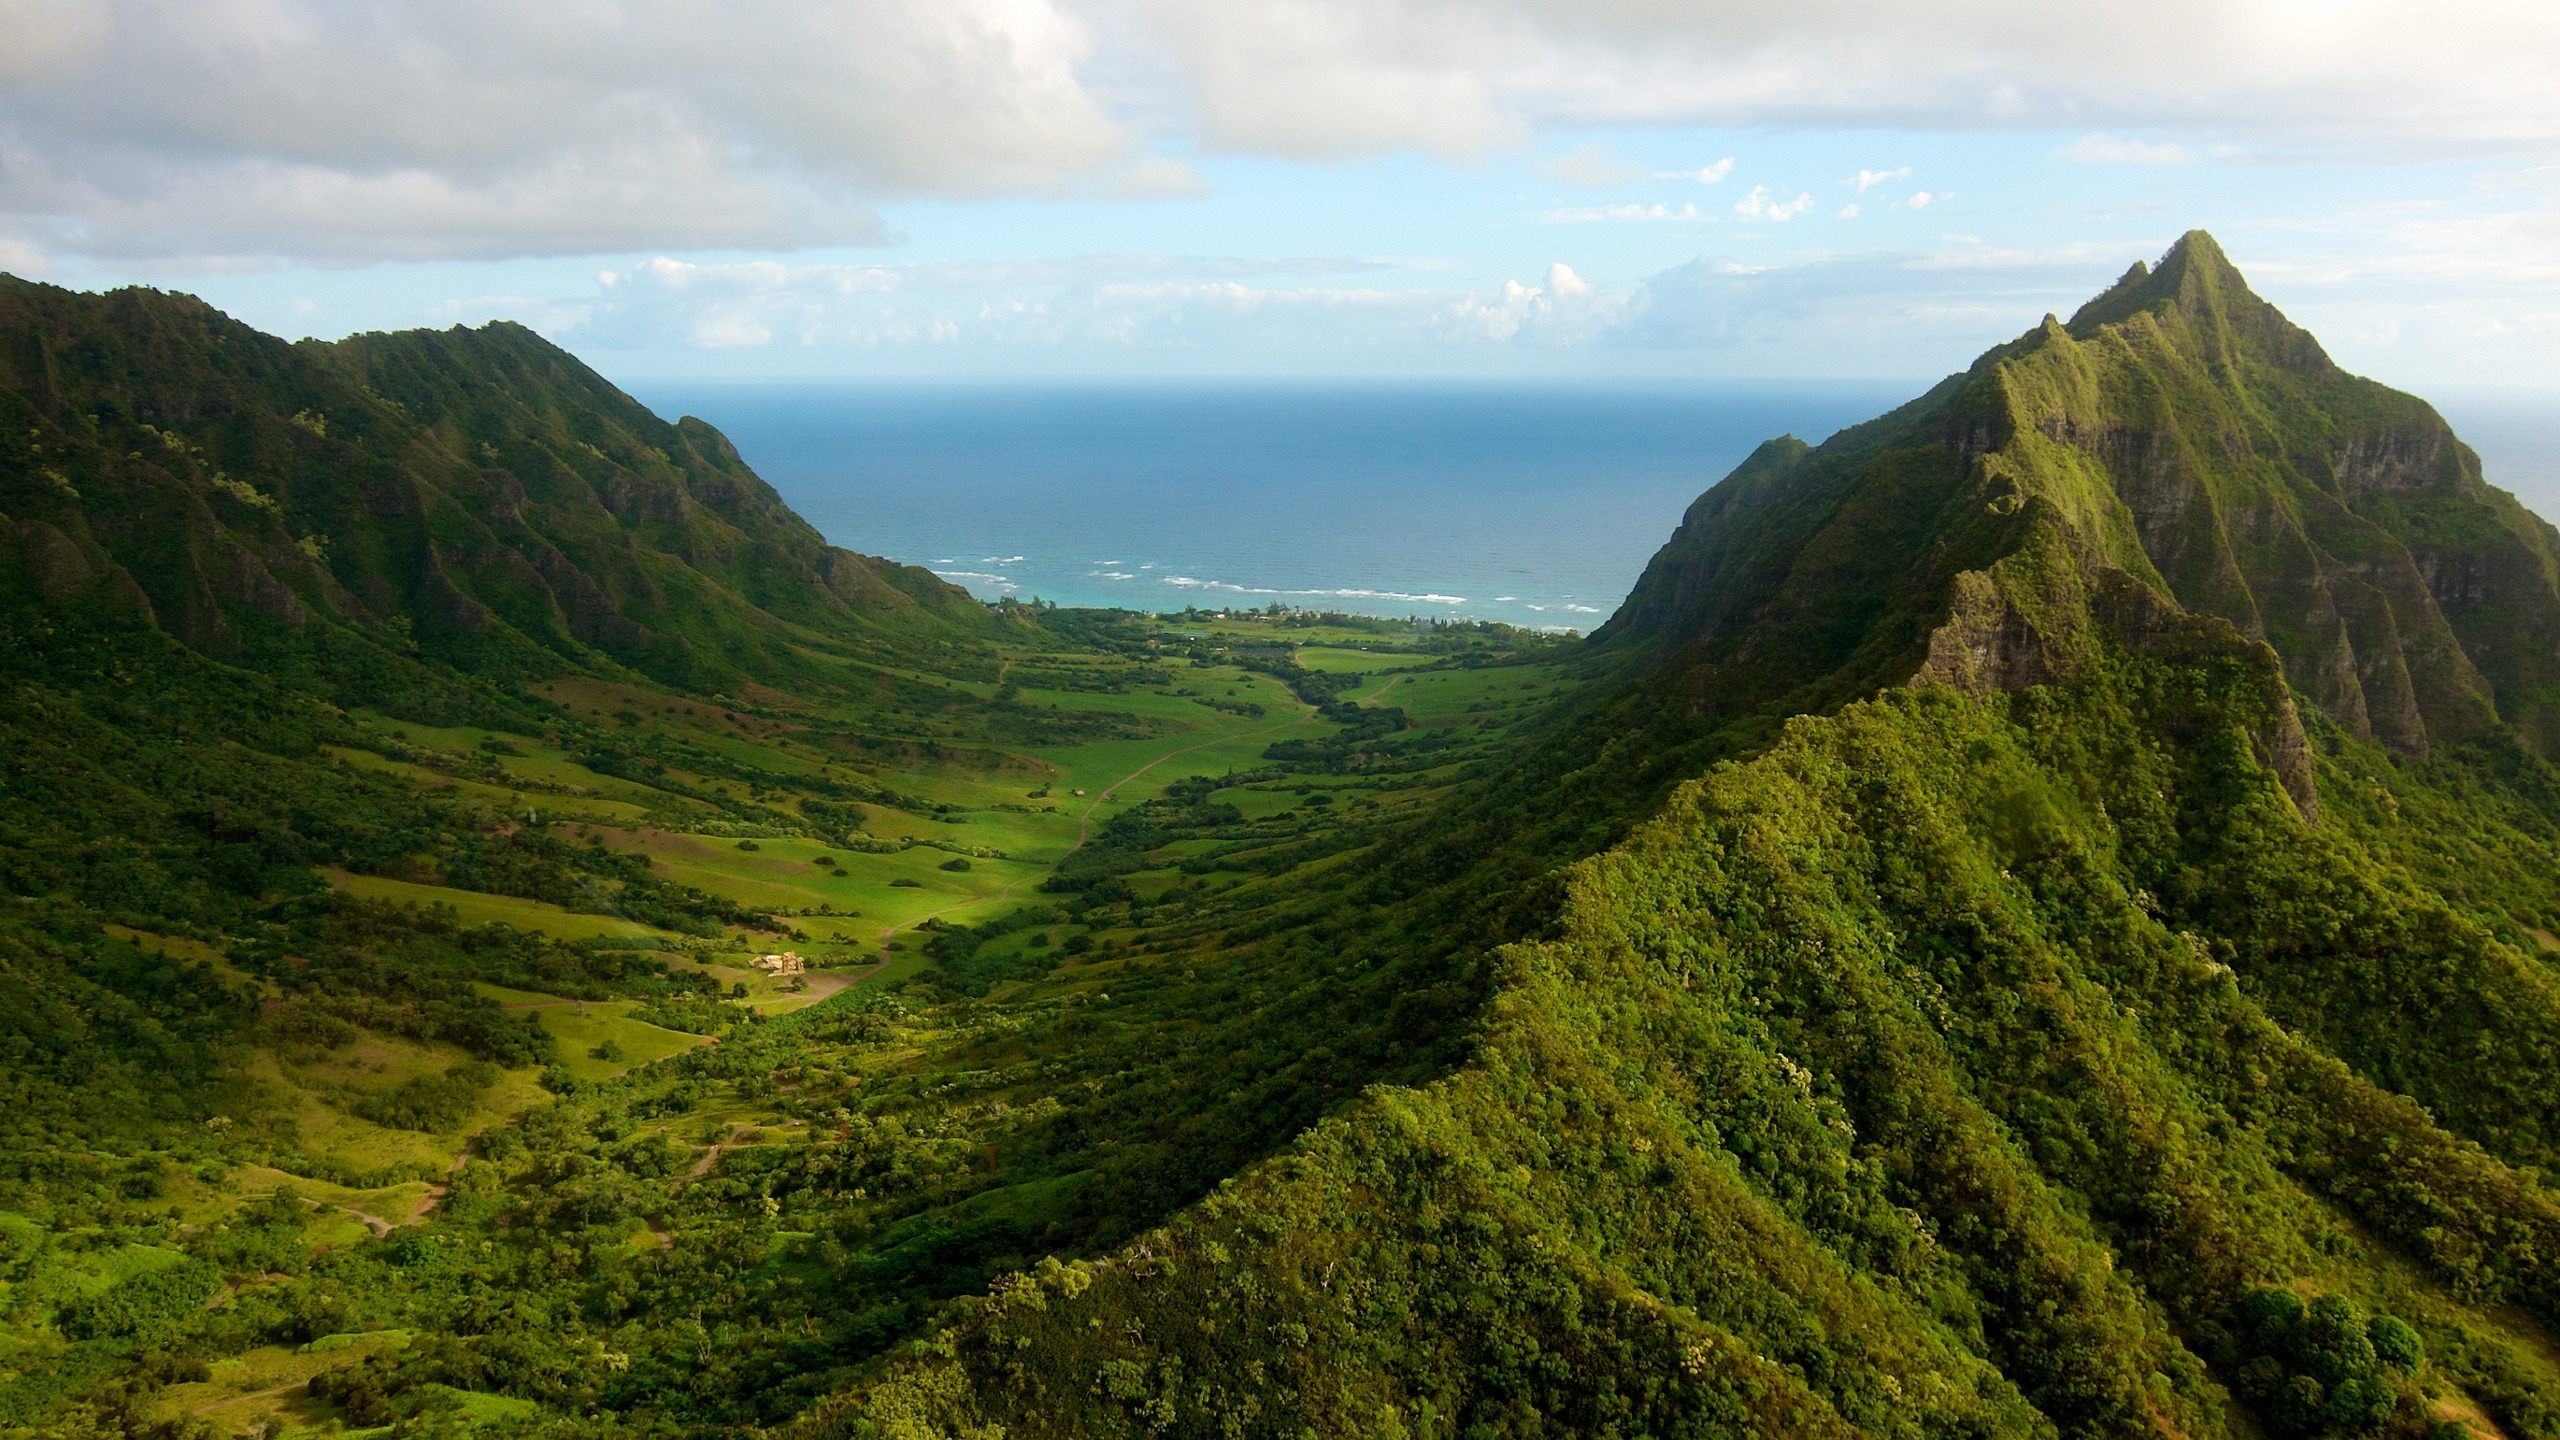 Oahu Valley for 2560x1440 HDTV resolution